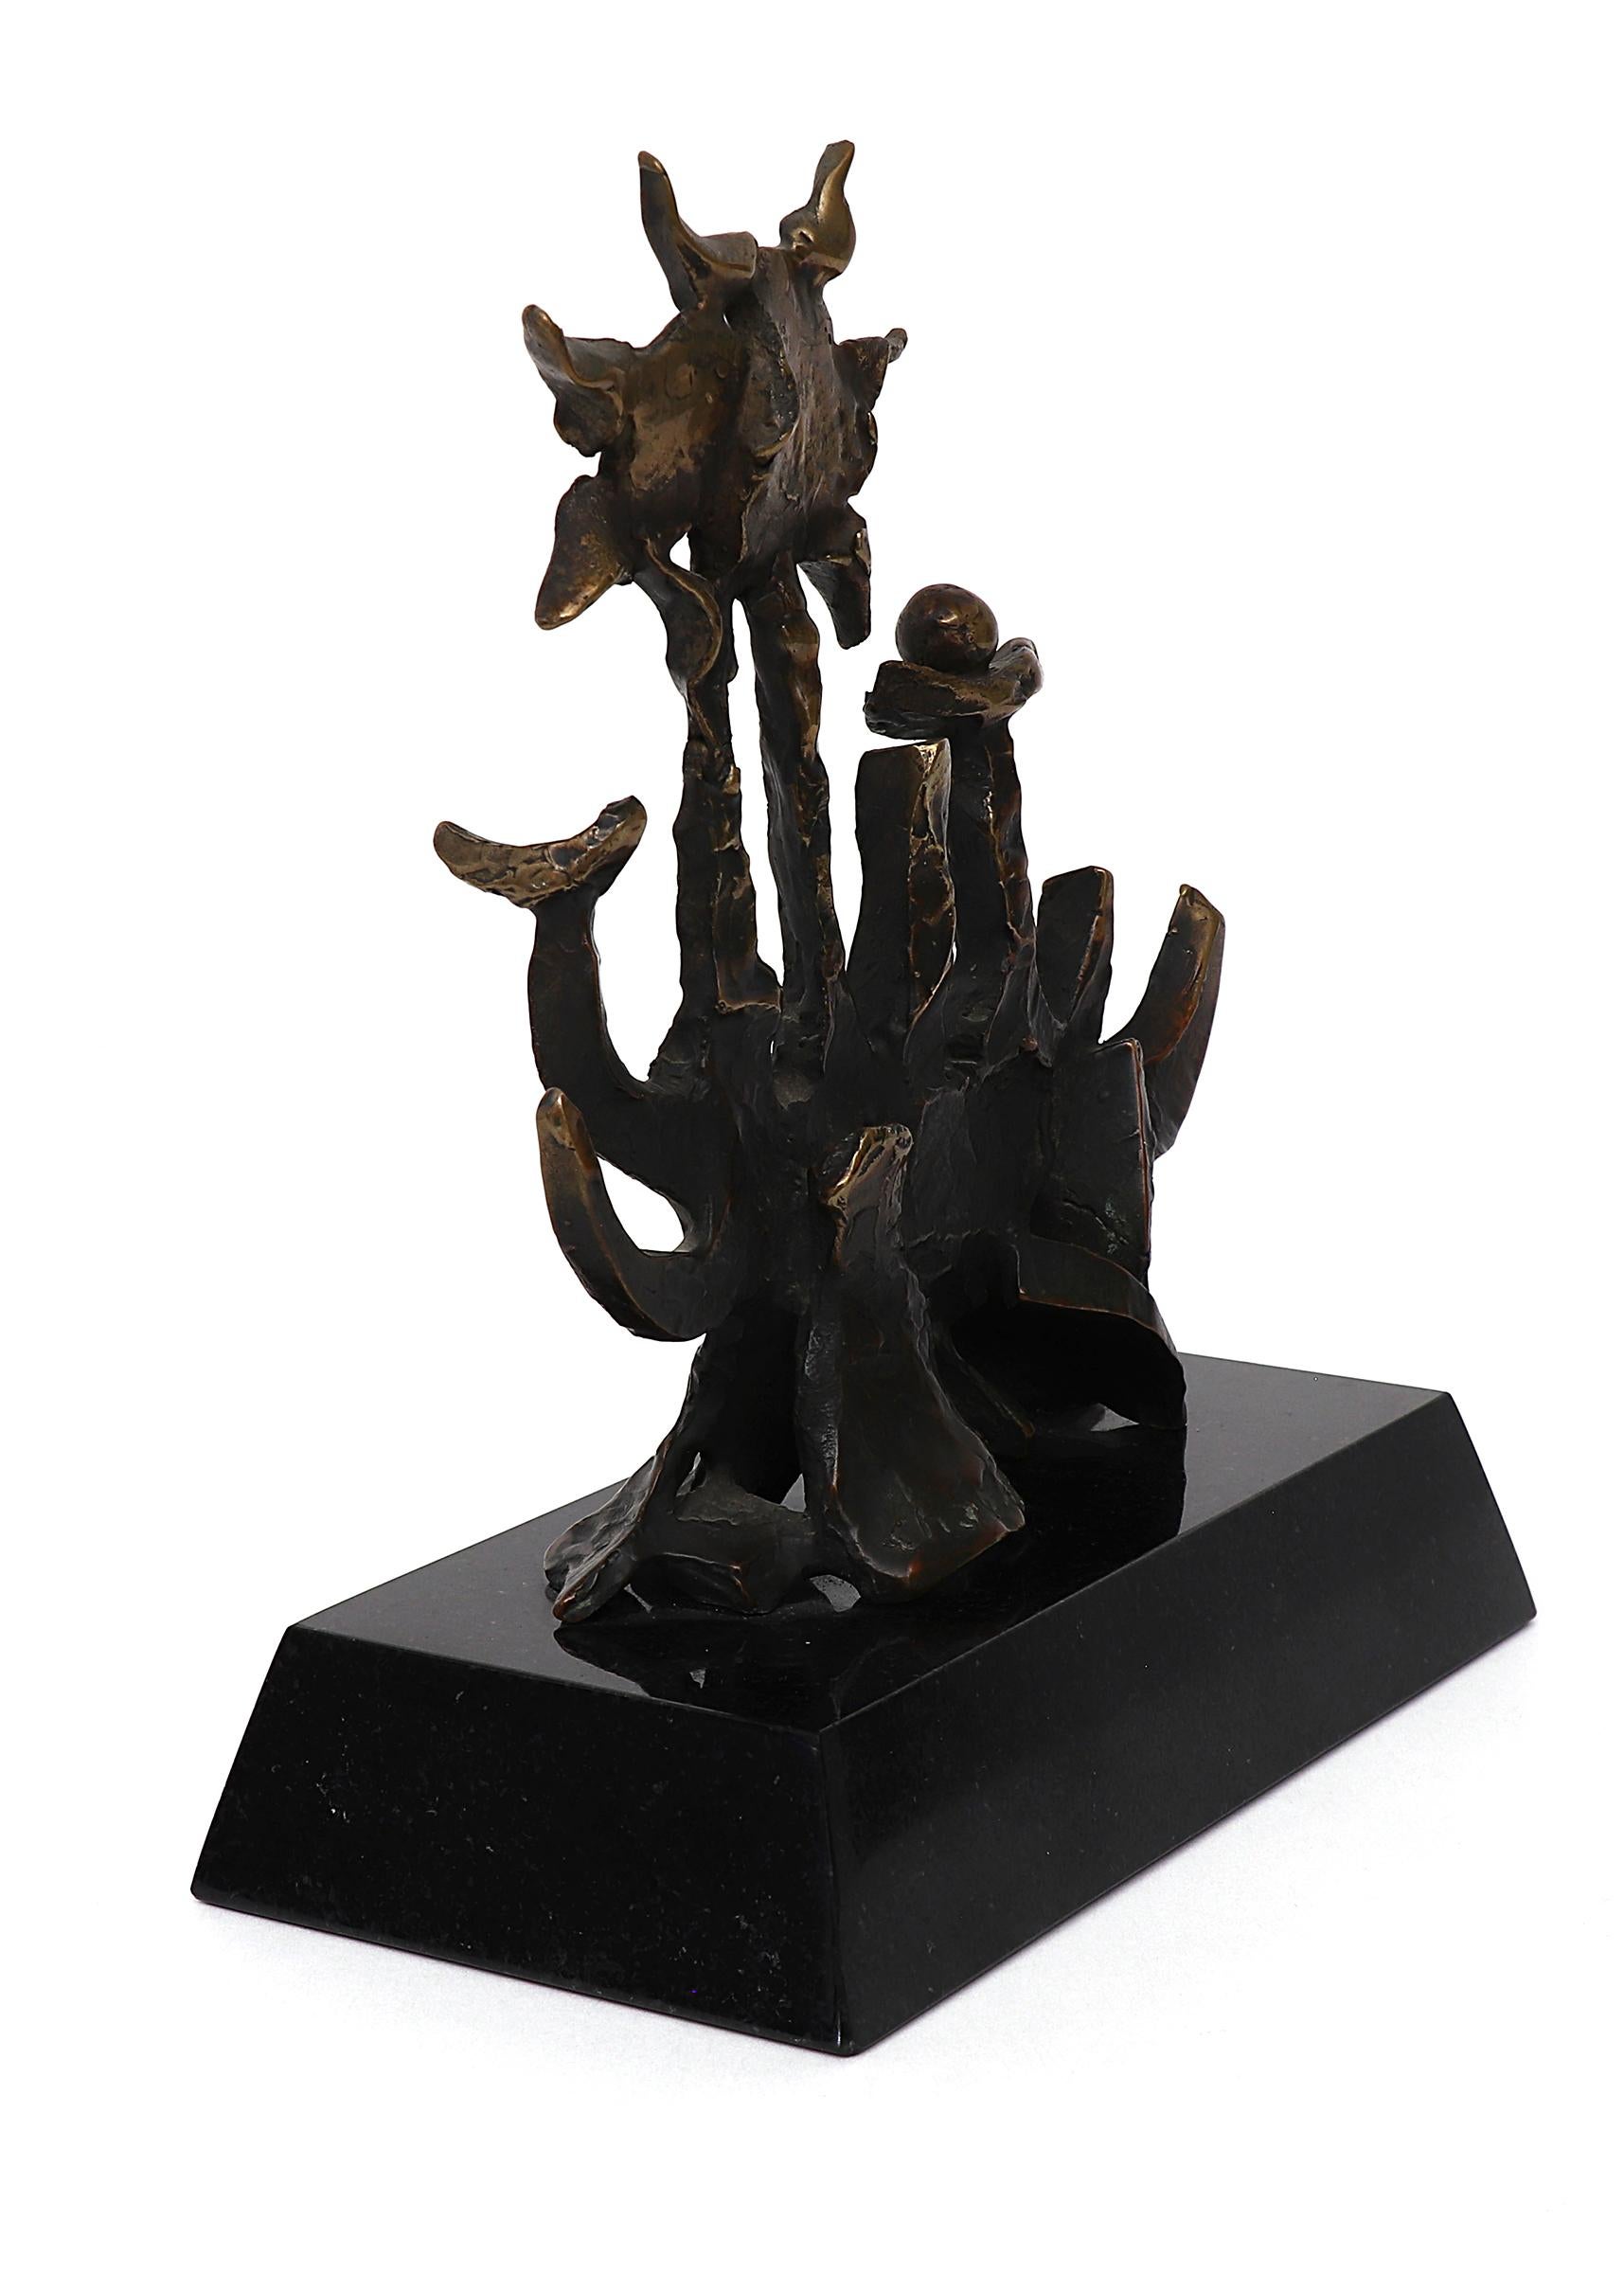 Abstract bronze sculpture mounted on granite base by Edward (Eduardo) Arcenio Chavez (1917-1995). Measures 7 ½ x 6 x 2 inches, including stand. 

Sculpture is in very good to excellent condition - please contact us for a detailed condition report.